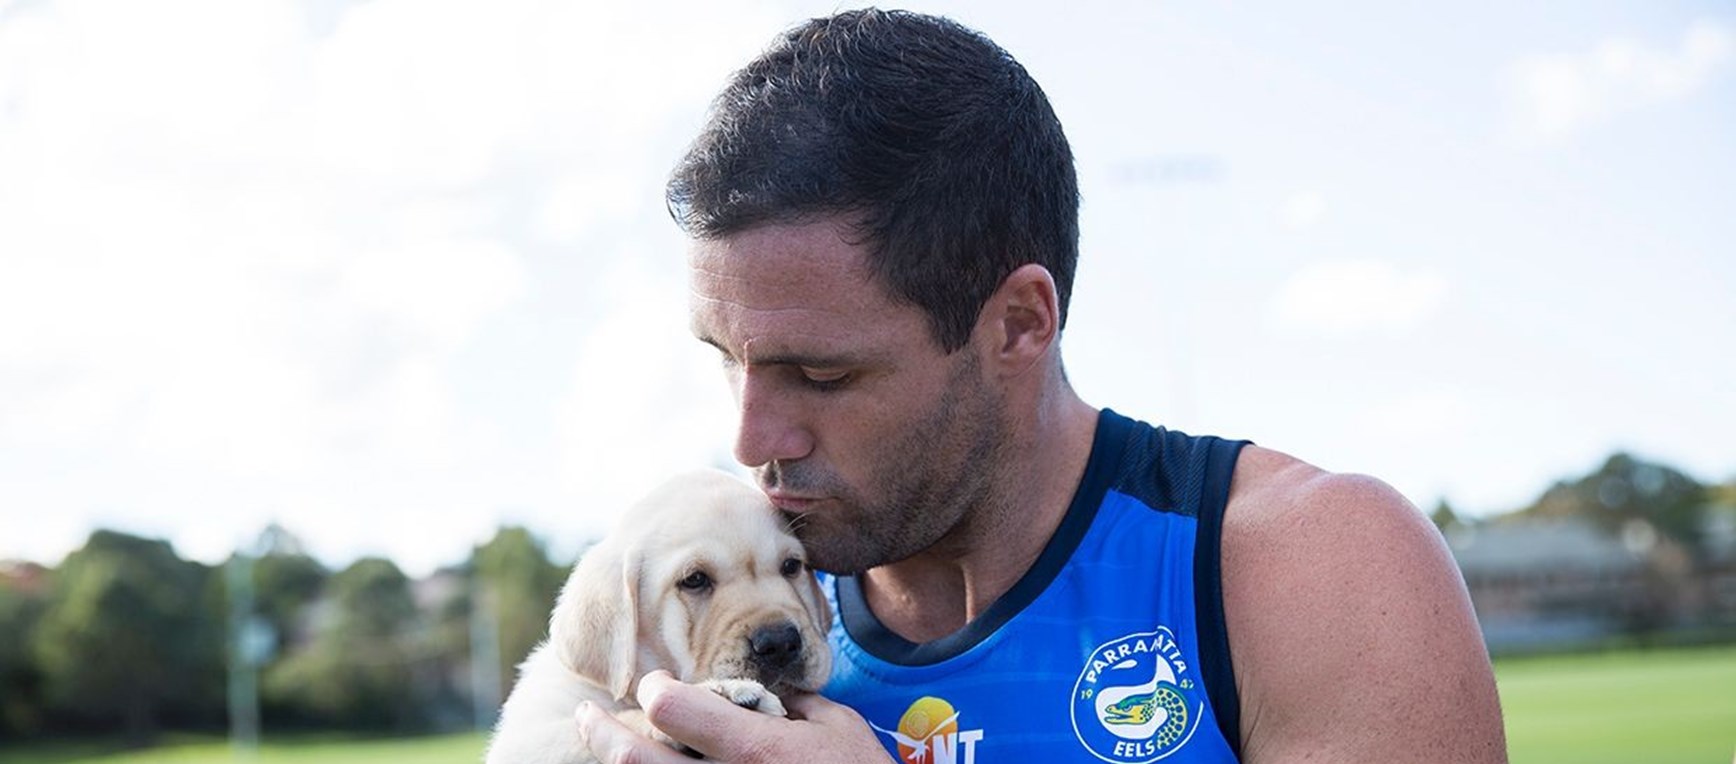 GALLERY | Guide Dogs NSW/ACT